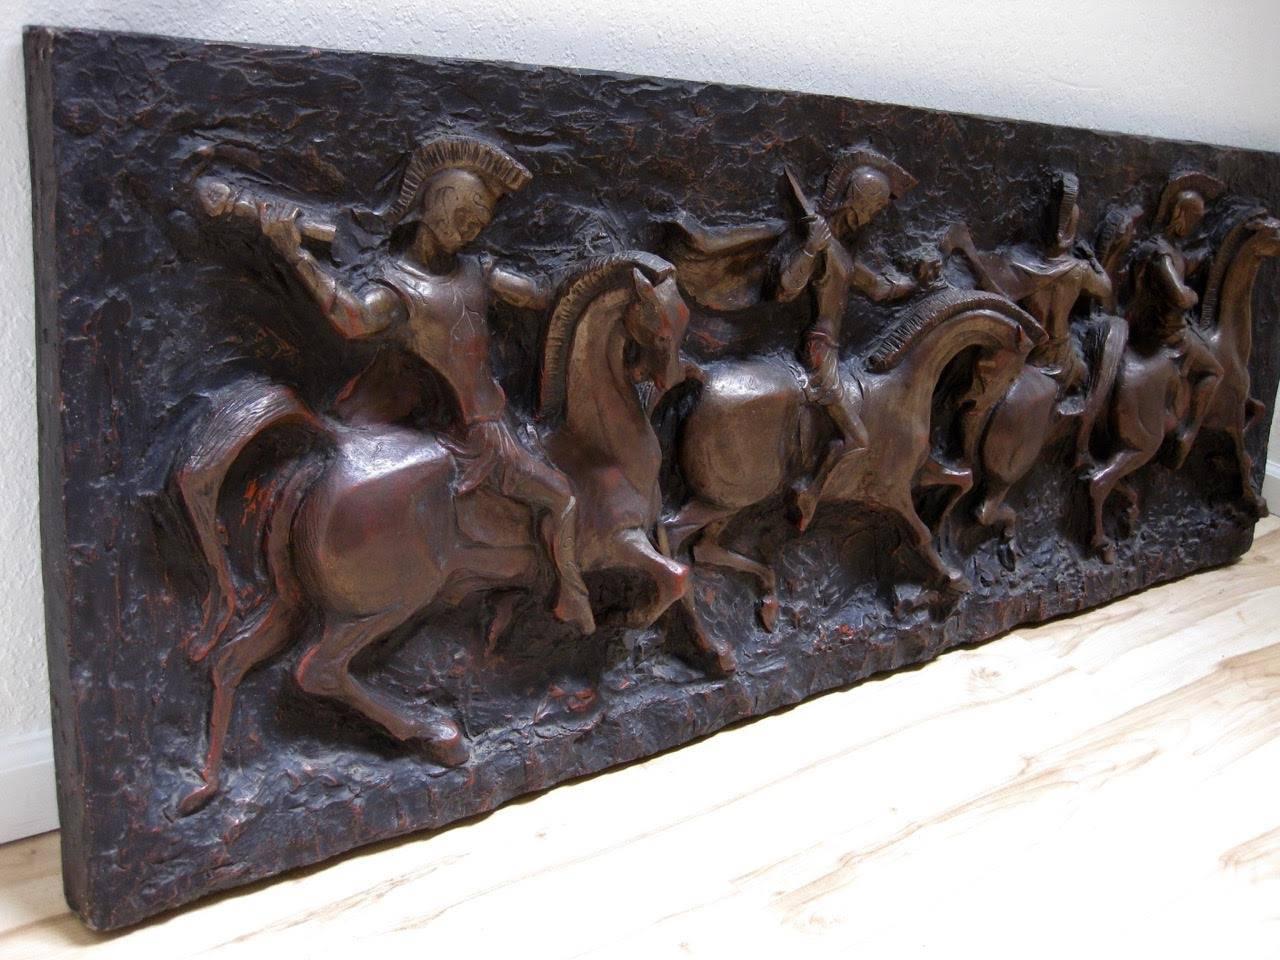 Mid-Century Modern three-dimensional molded fiberglass form of Roman gladiator soldiers on horseback. Finished in a painted bronze finish. Signed 